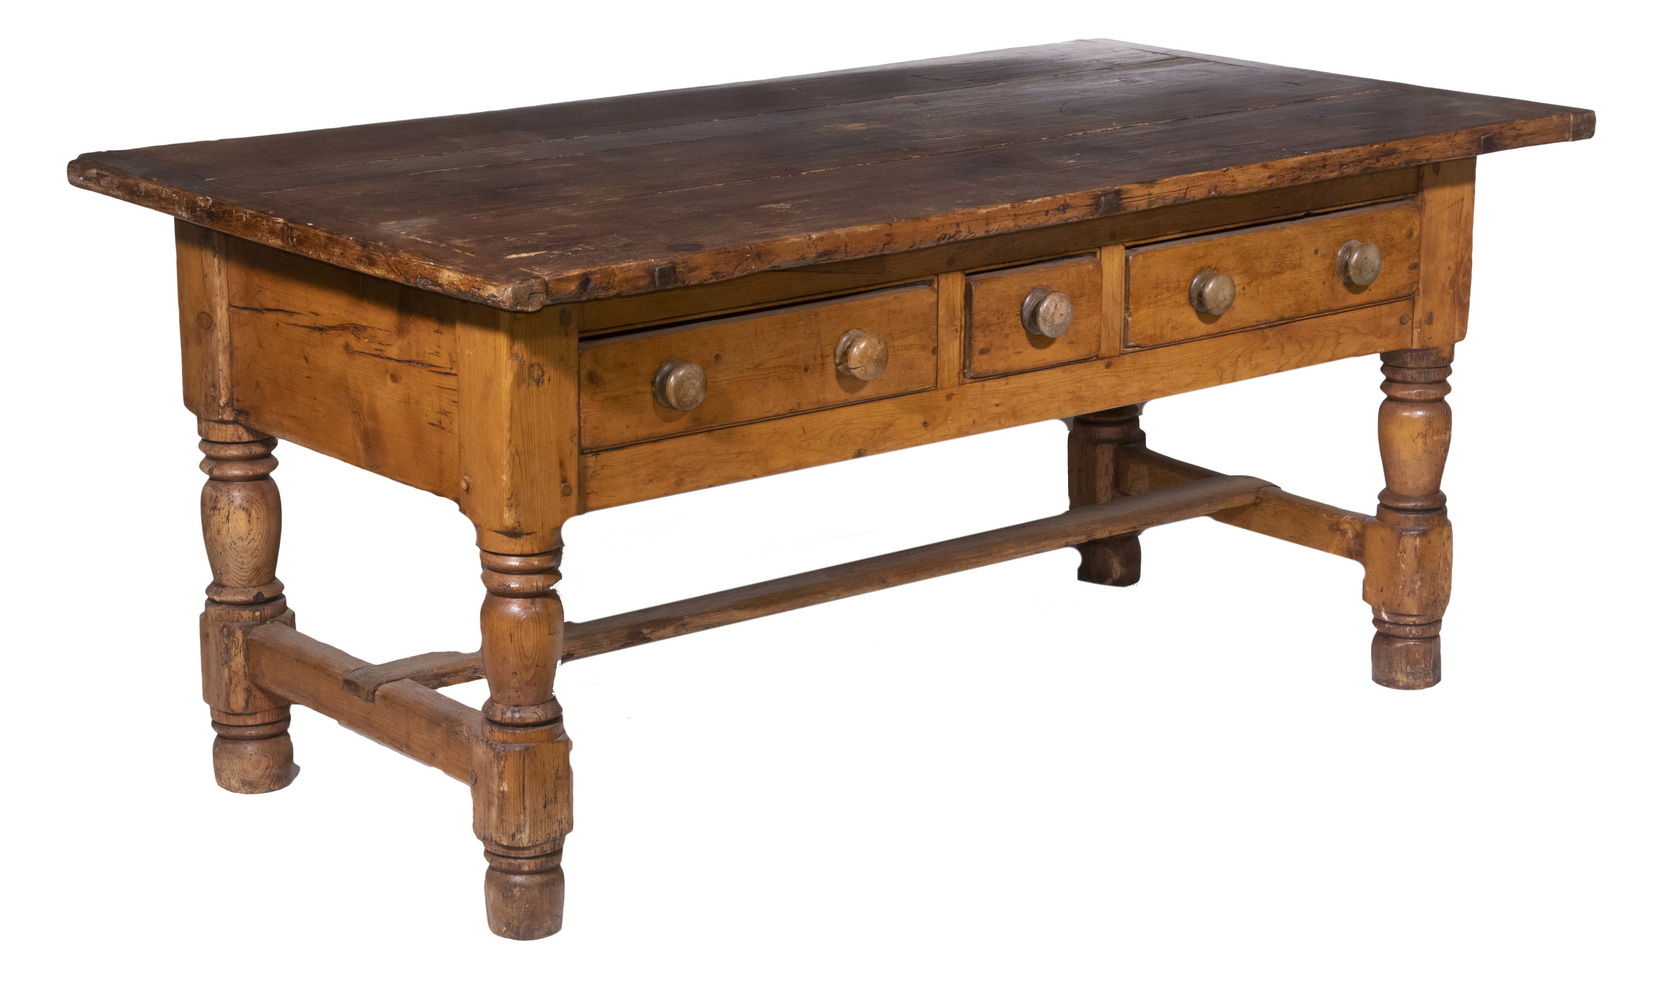 EARLY PINE WORK TABLE 18th c. Heavy